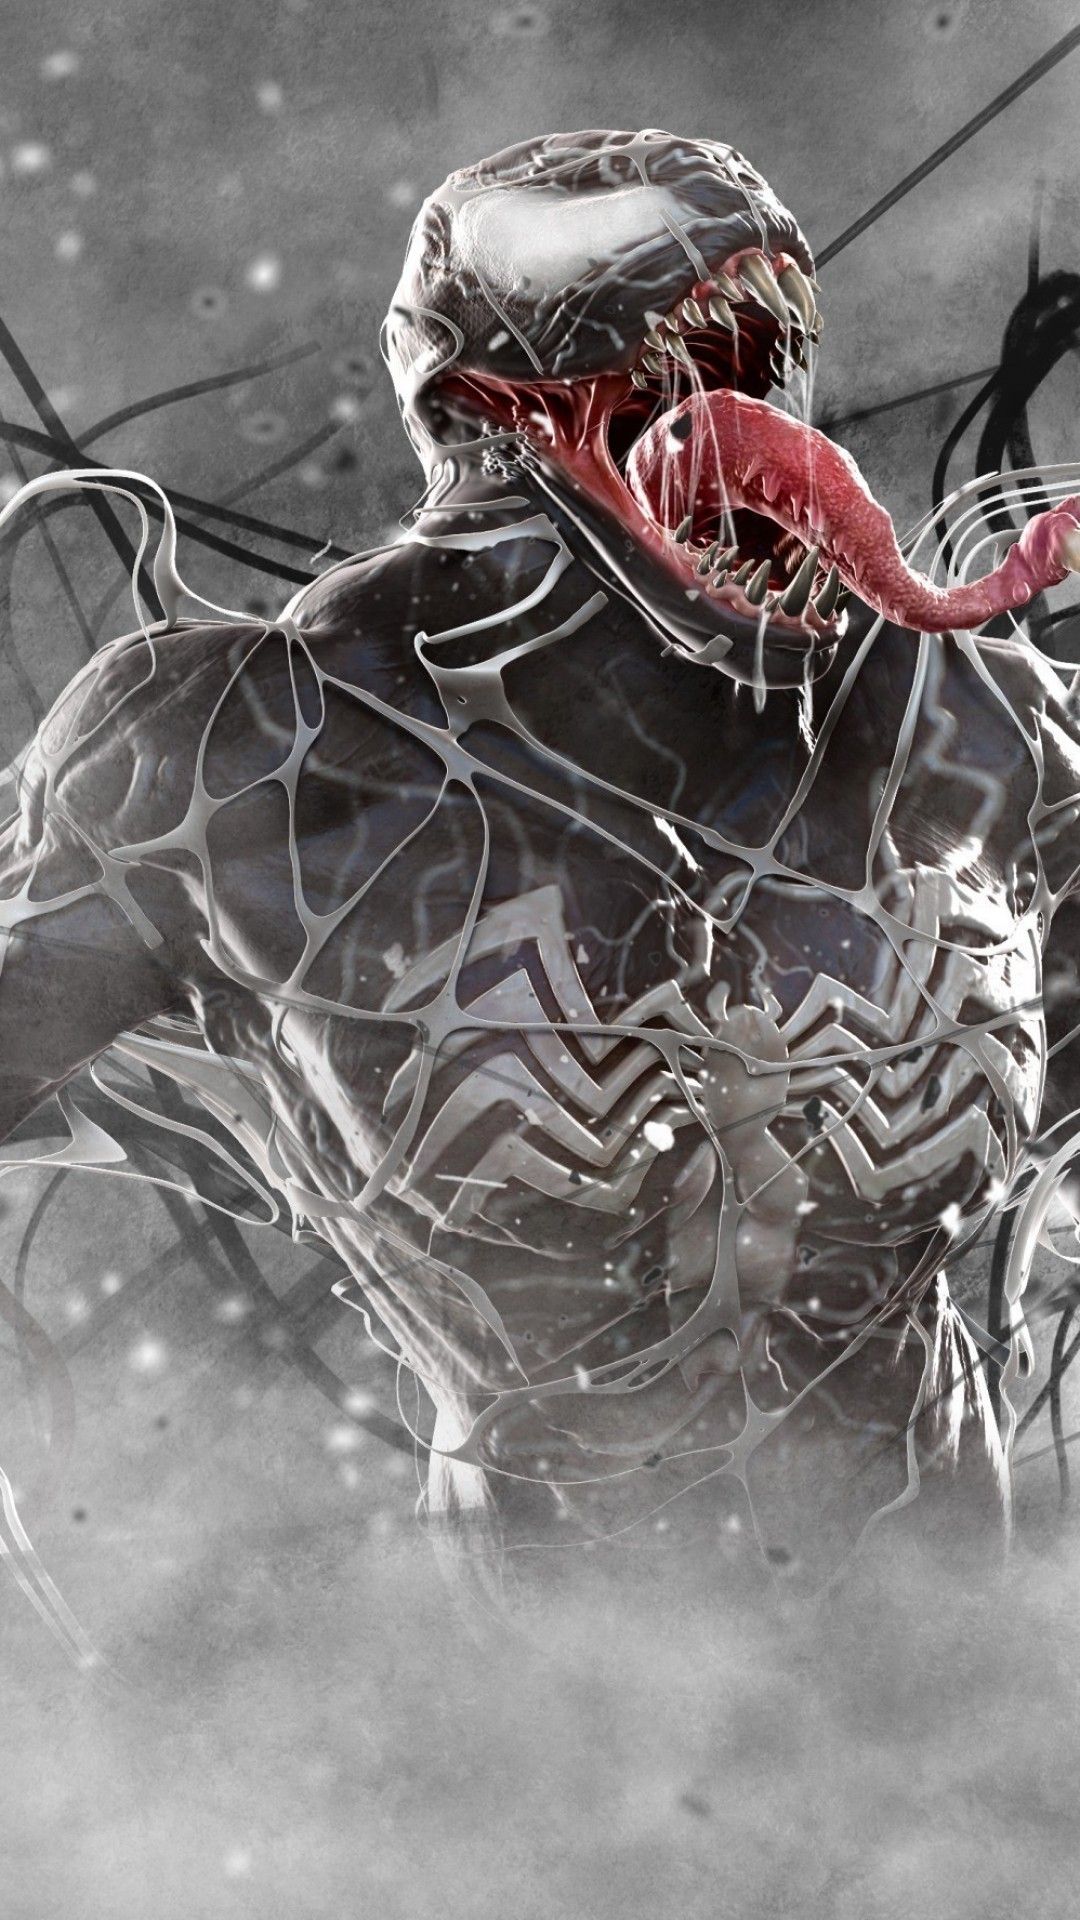 Venom Movie Wallpaper HD iPhone Free Movies and TV Shows